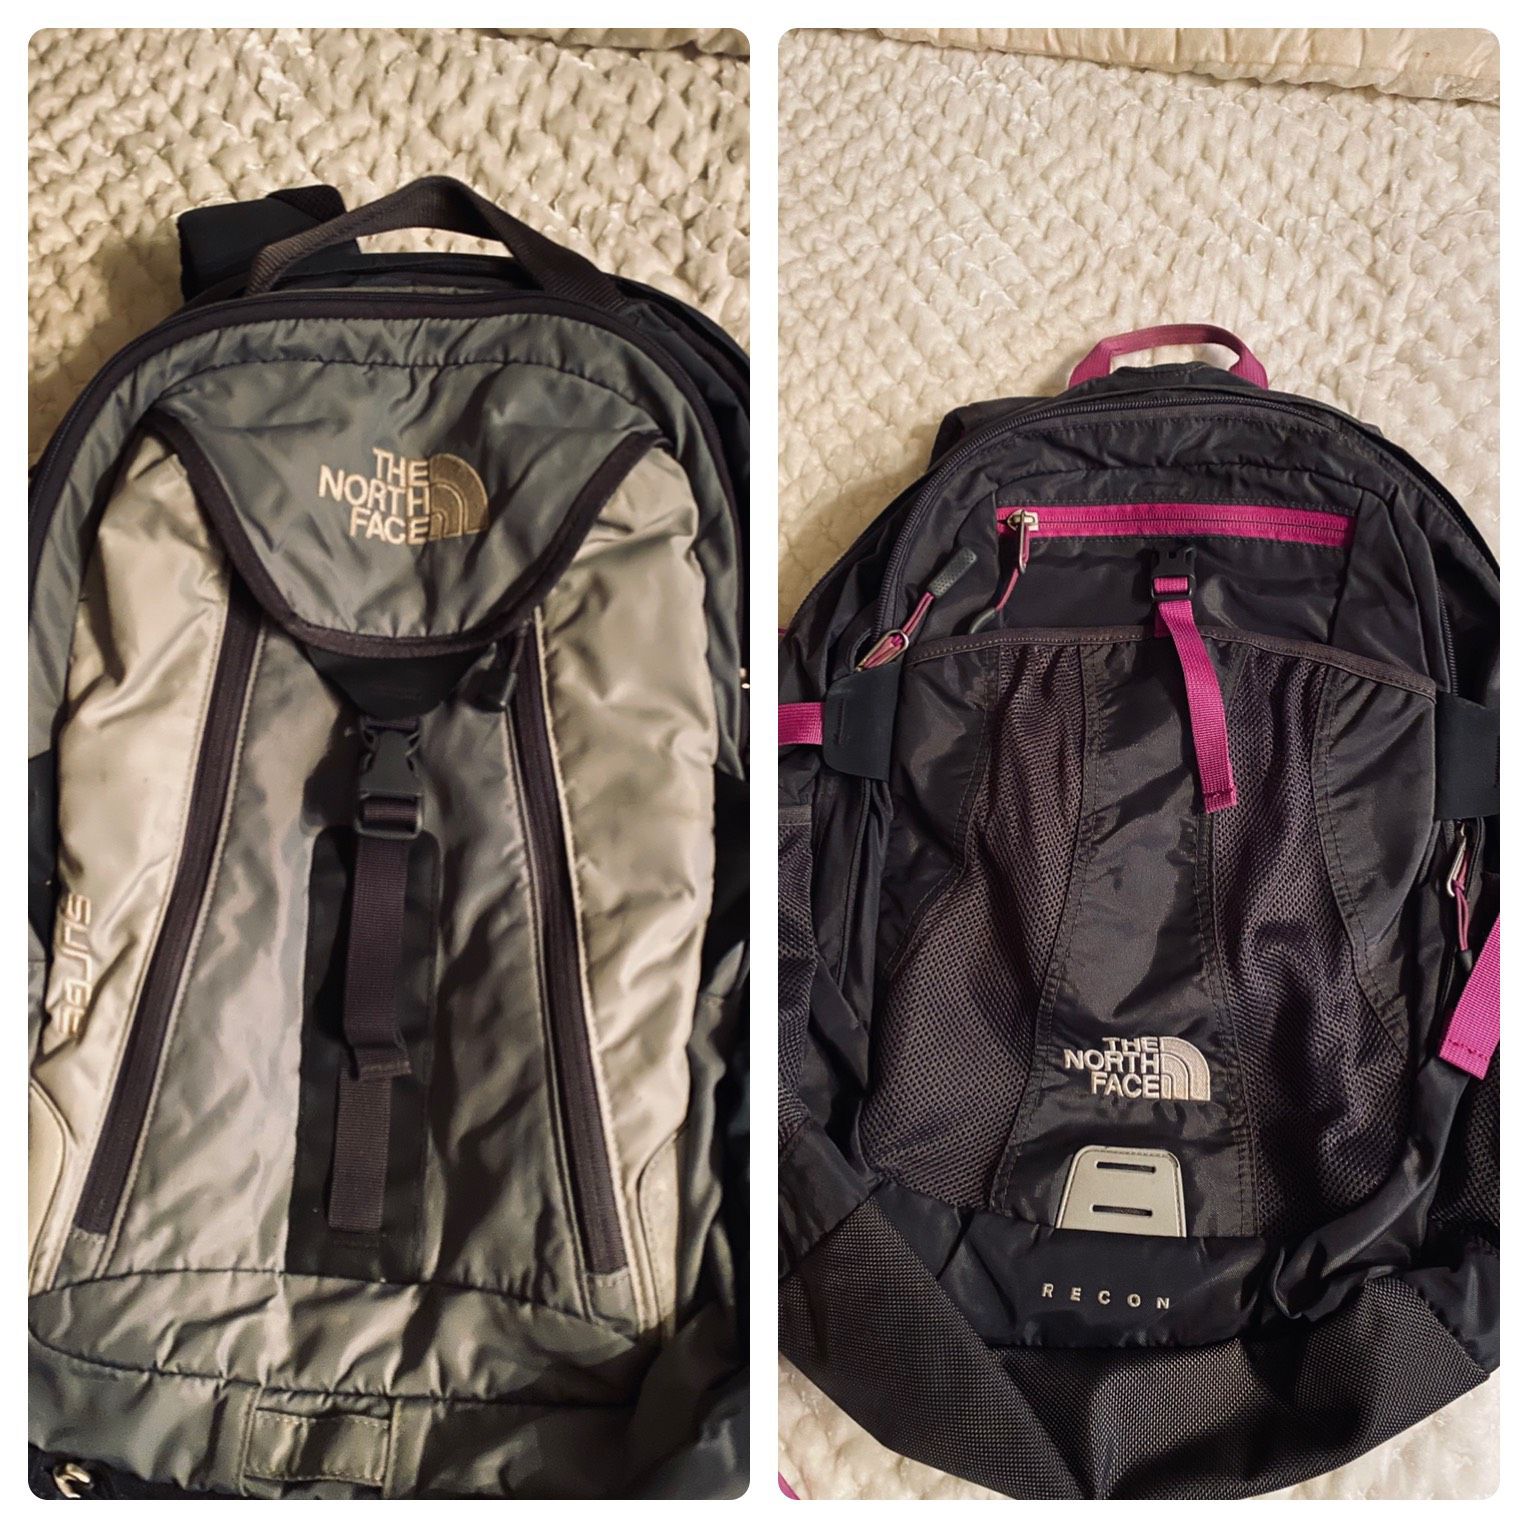 The North Face backpacks